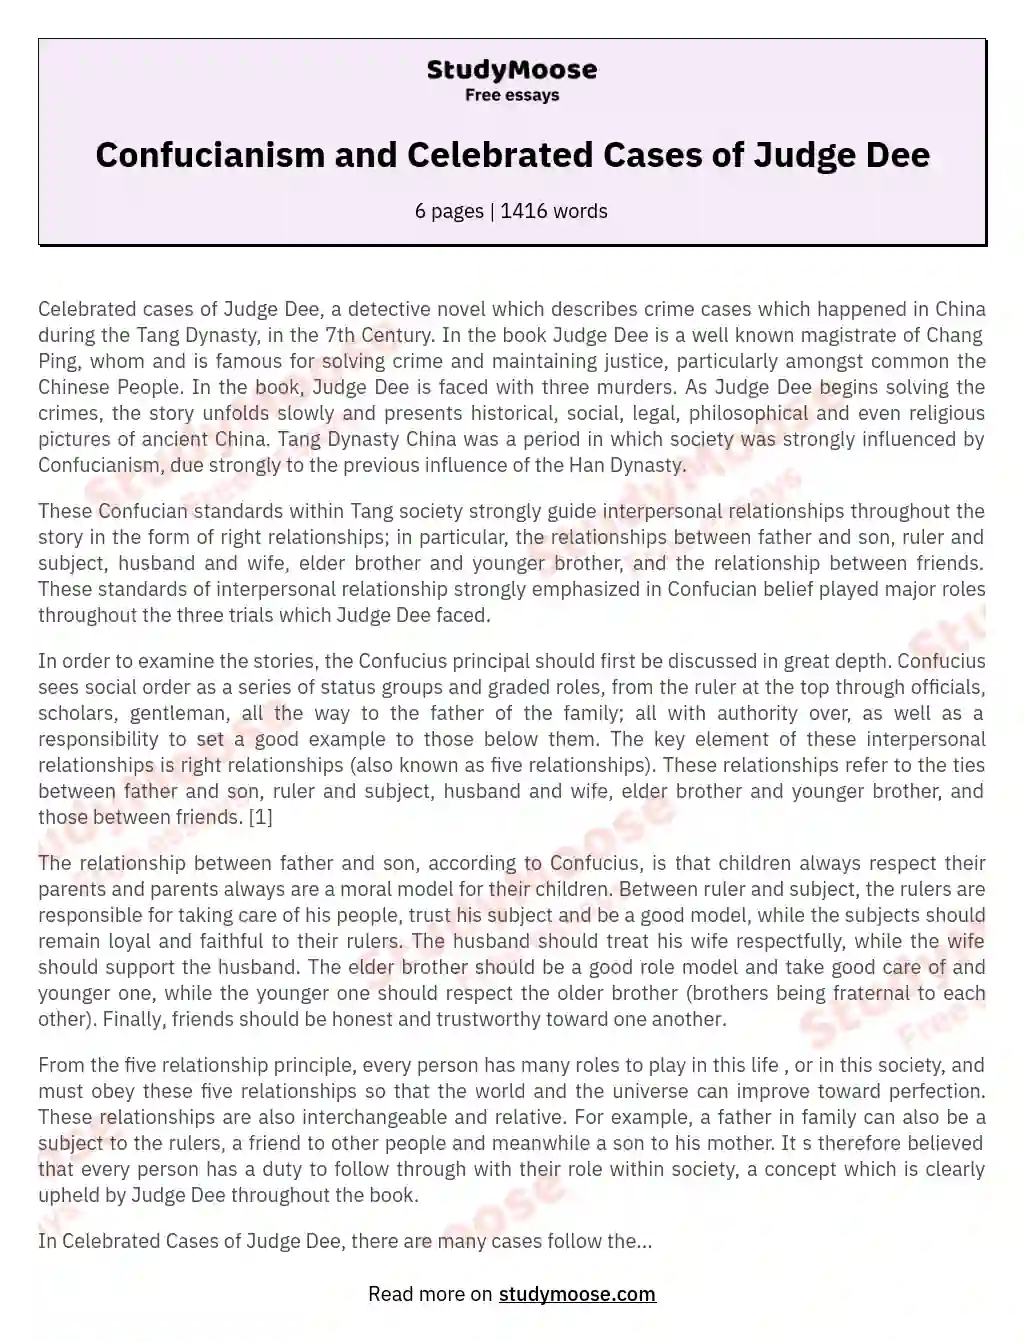 Confucianism and Celebrated Cases of Judge Dee